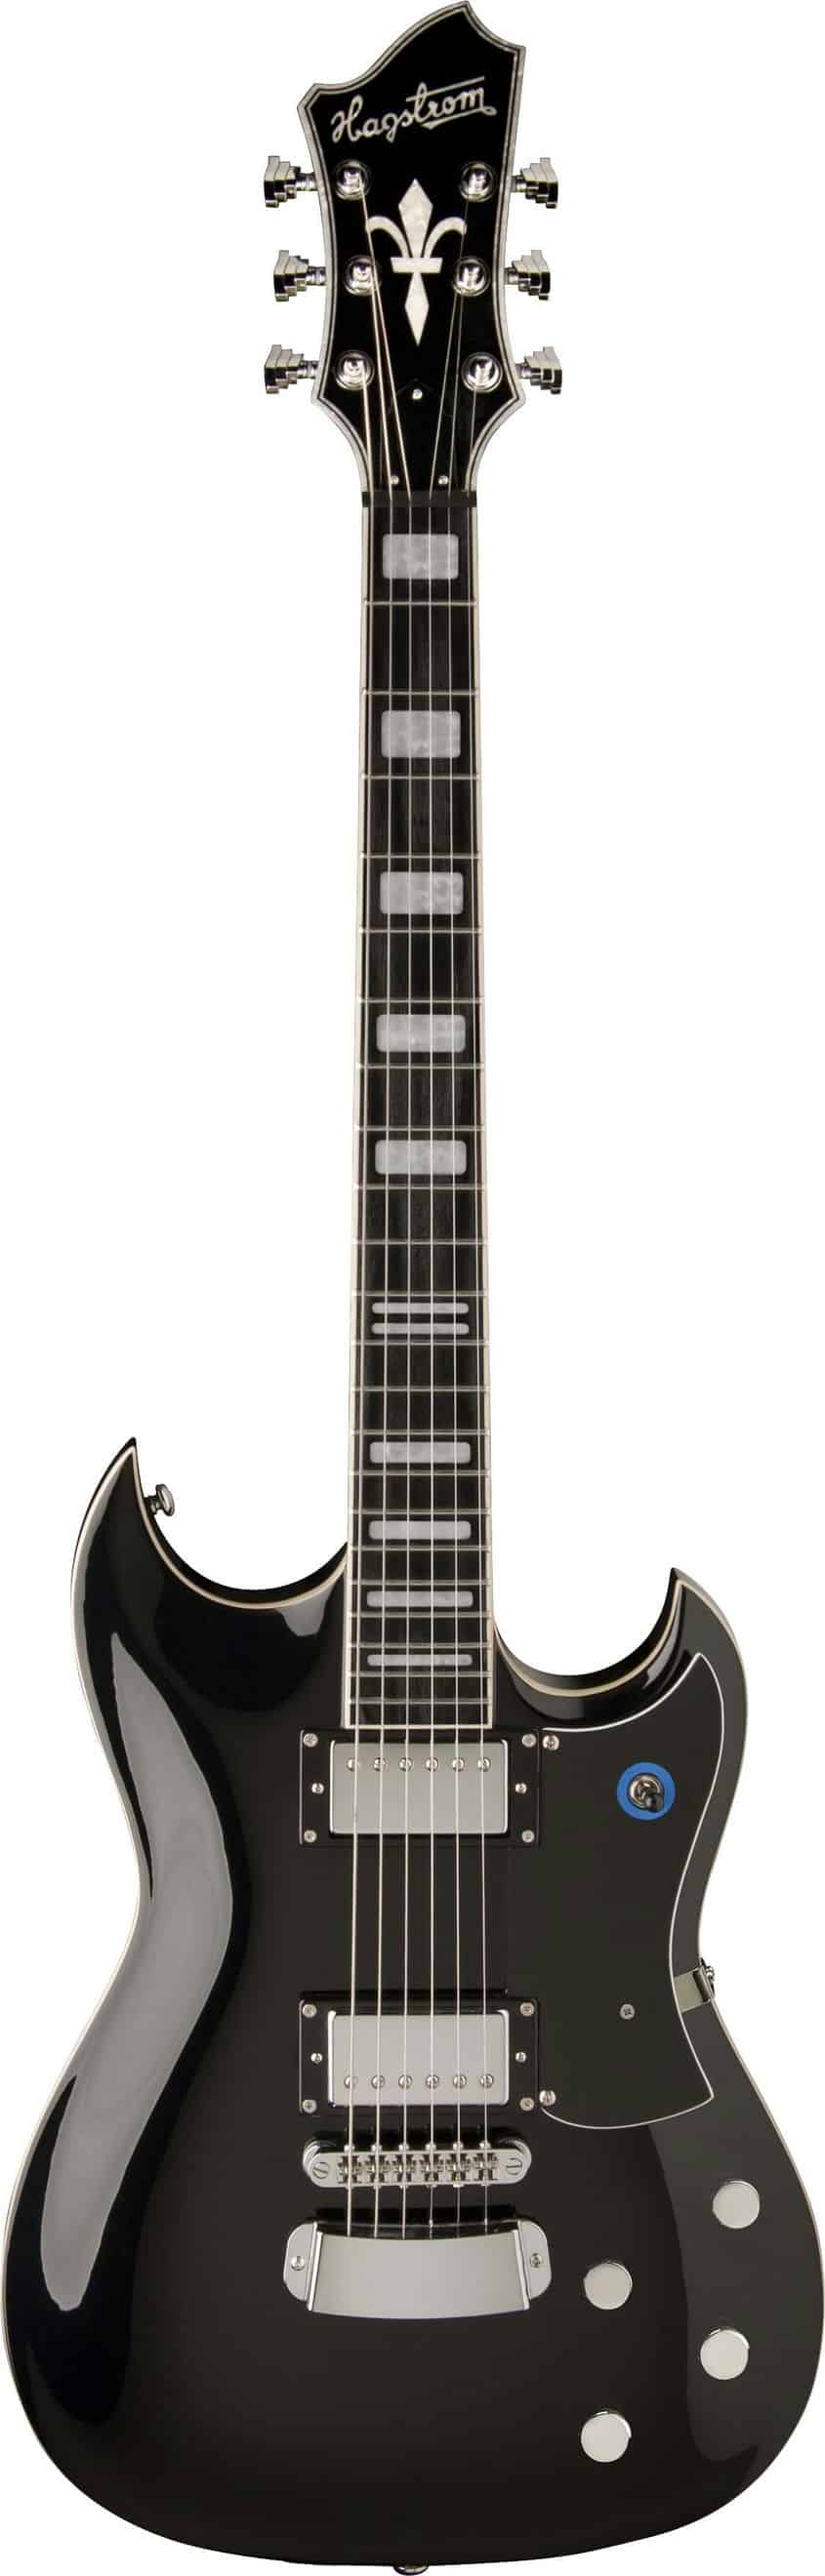 An image of Hagstrom Pat Smear Signature Electric Guitar | PMT Online